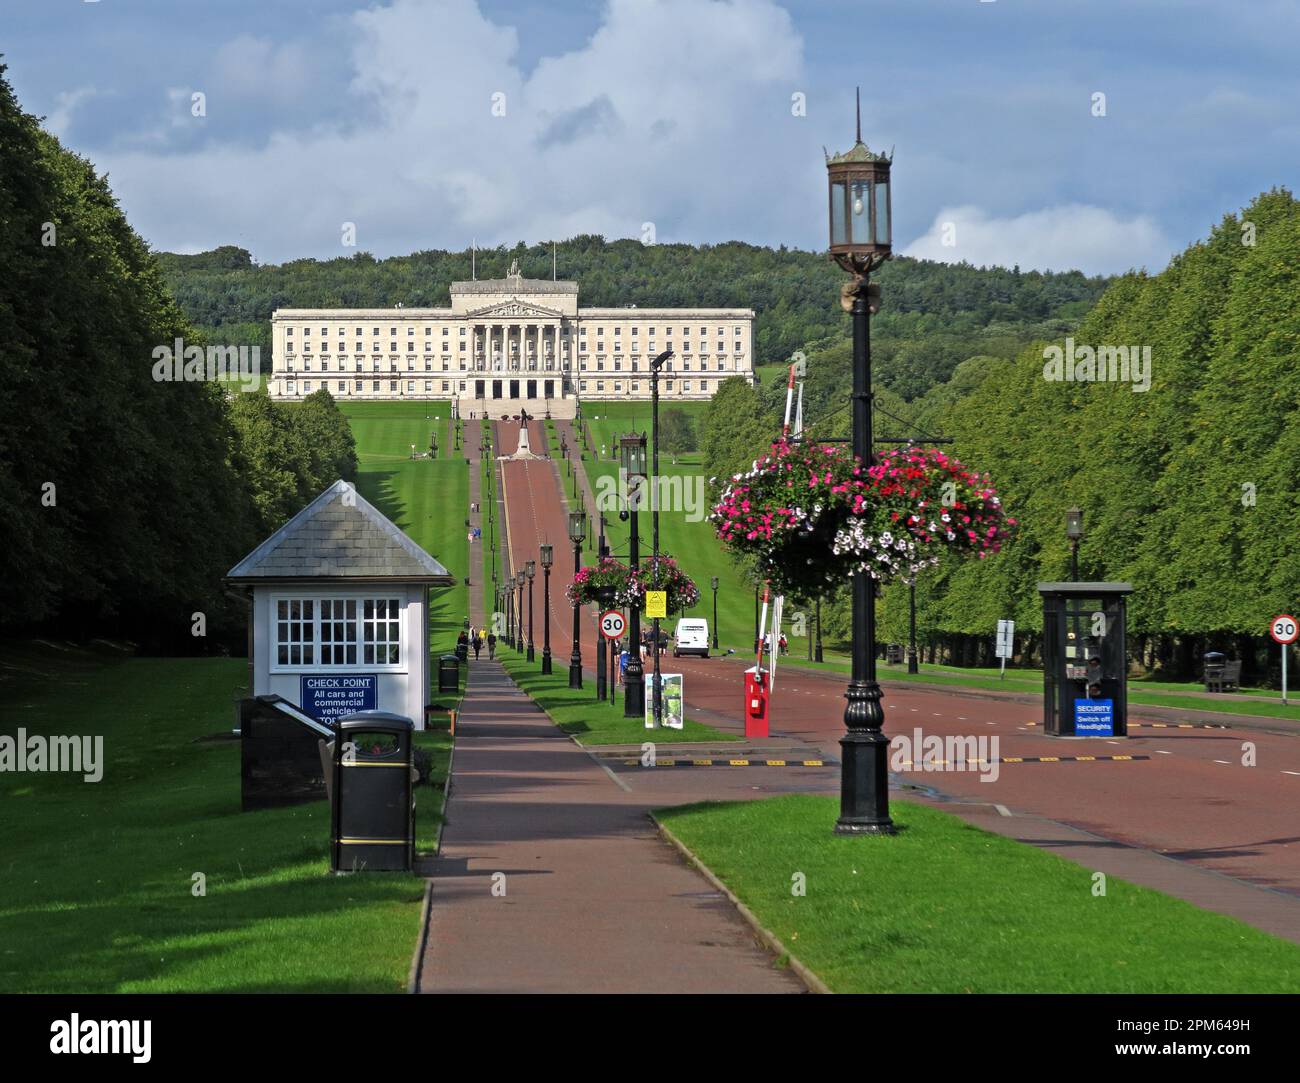 Building & estate of the Northern Ireland Assembly,Stormont Estate, at the end of the tree lined avenue, Belfast,County Down, Northern Ireland,BT4 3LP Stock Photo